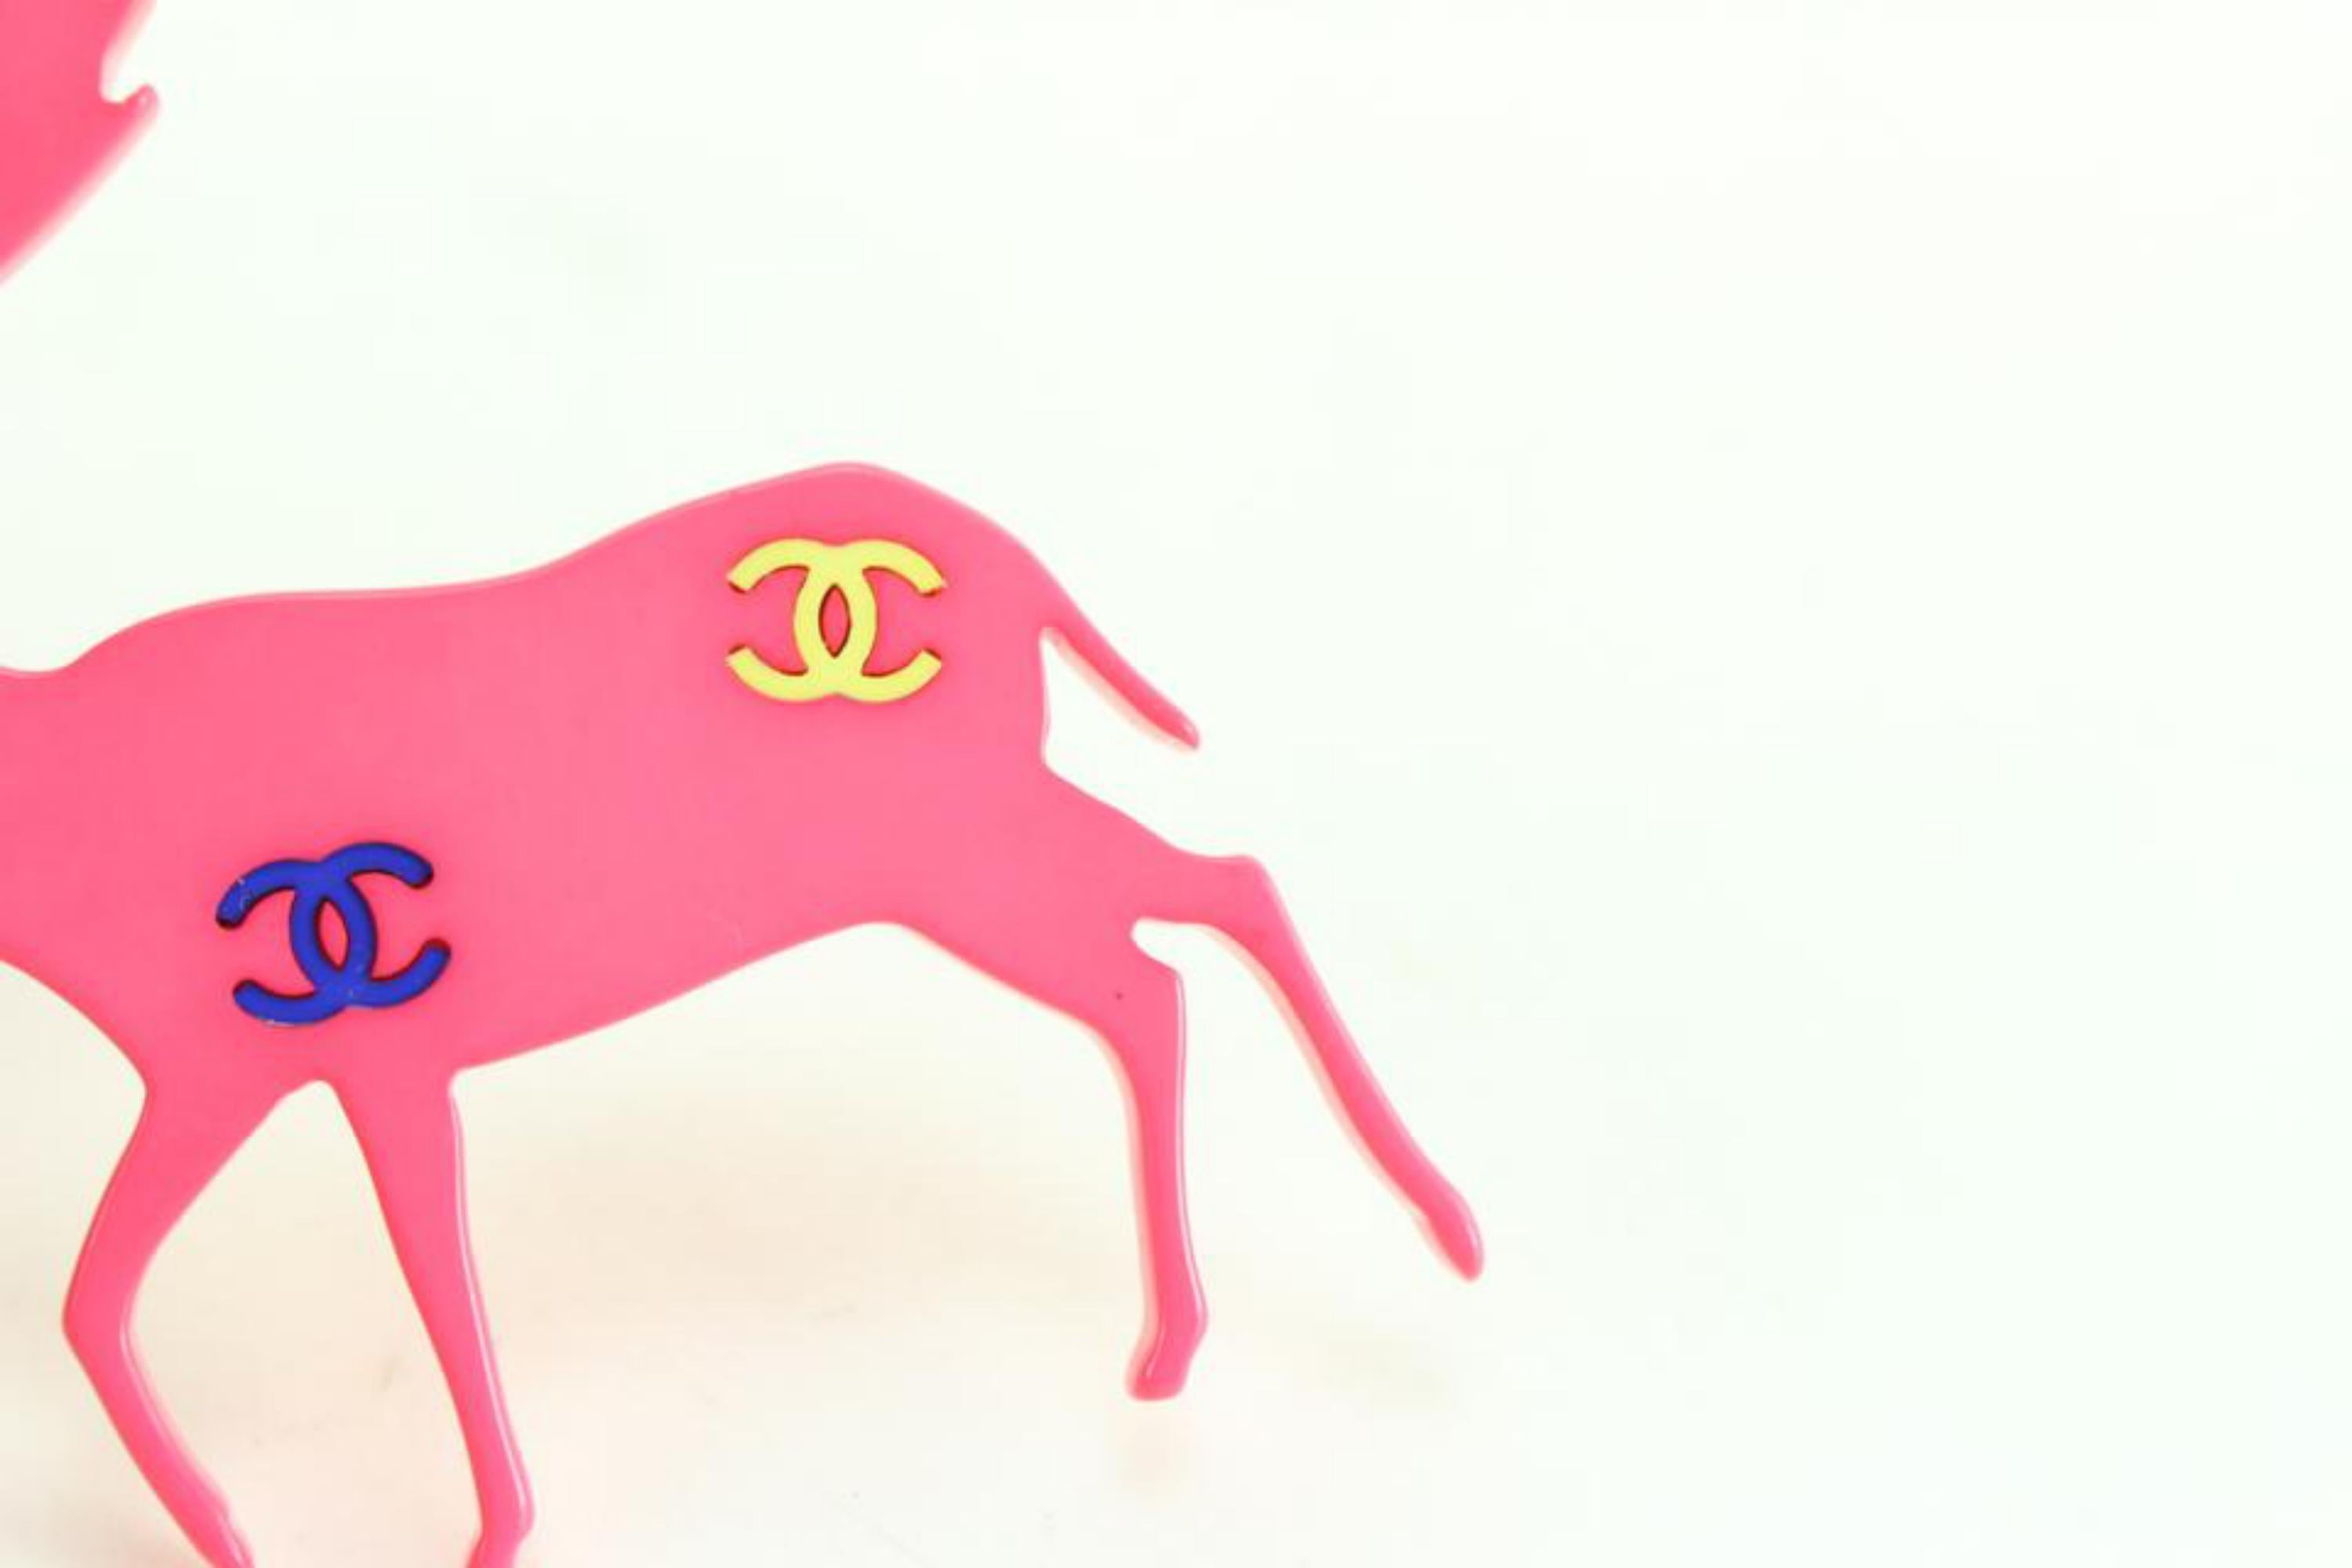 Chanel Pink Christmas Holiday CC Multicolor Reindeer Deer Brooch Pin 21cz76s In Excellent Condition For Sale In Dix hills, NY